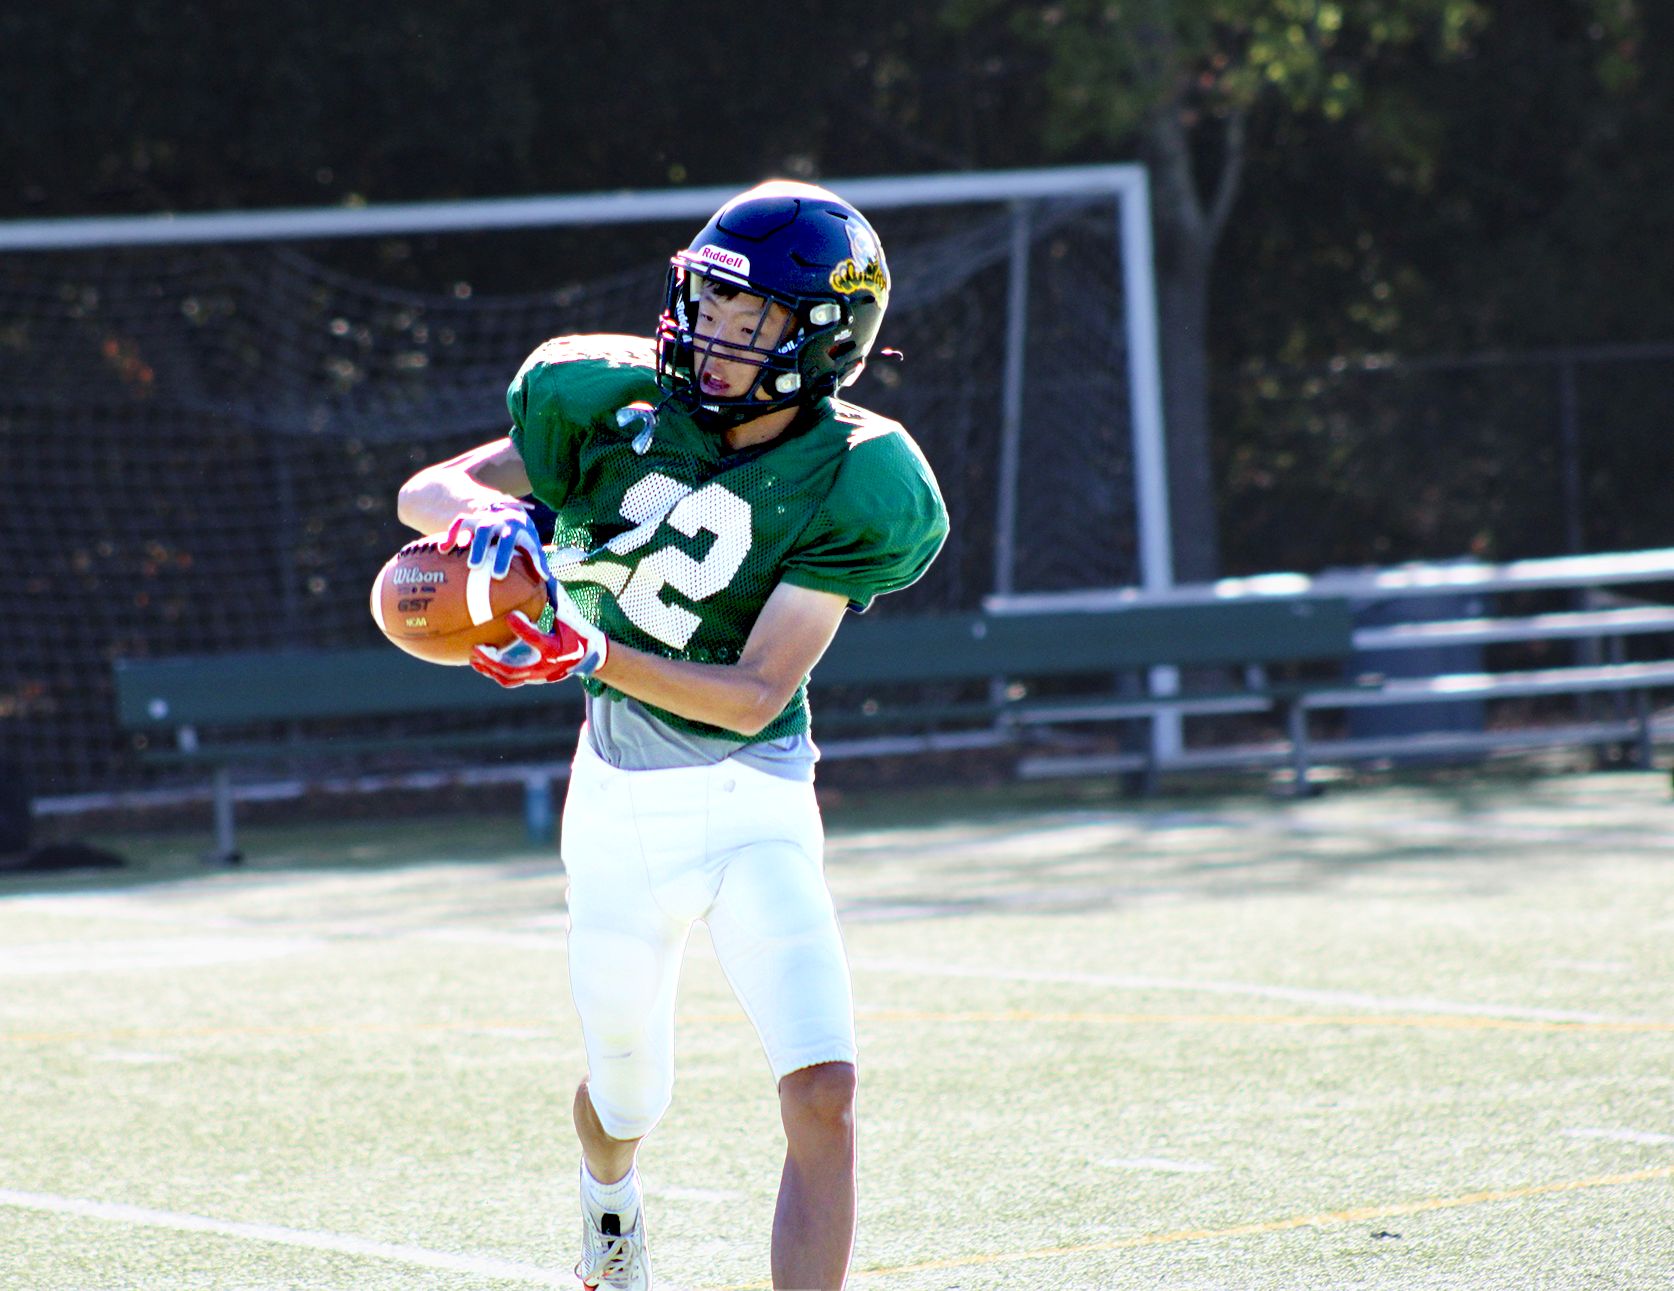 Brandon Ge catches football in stride during practice.